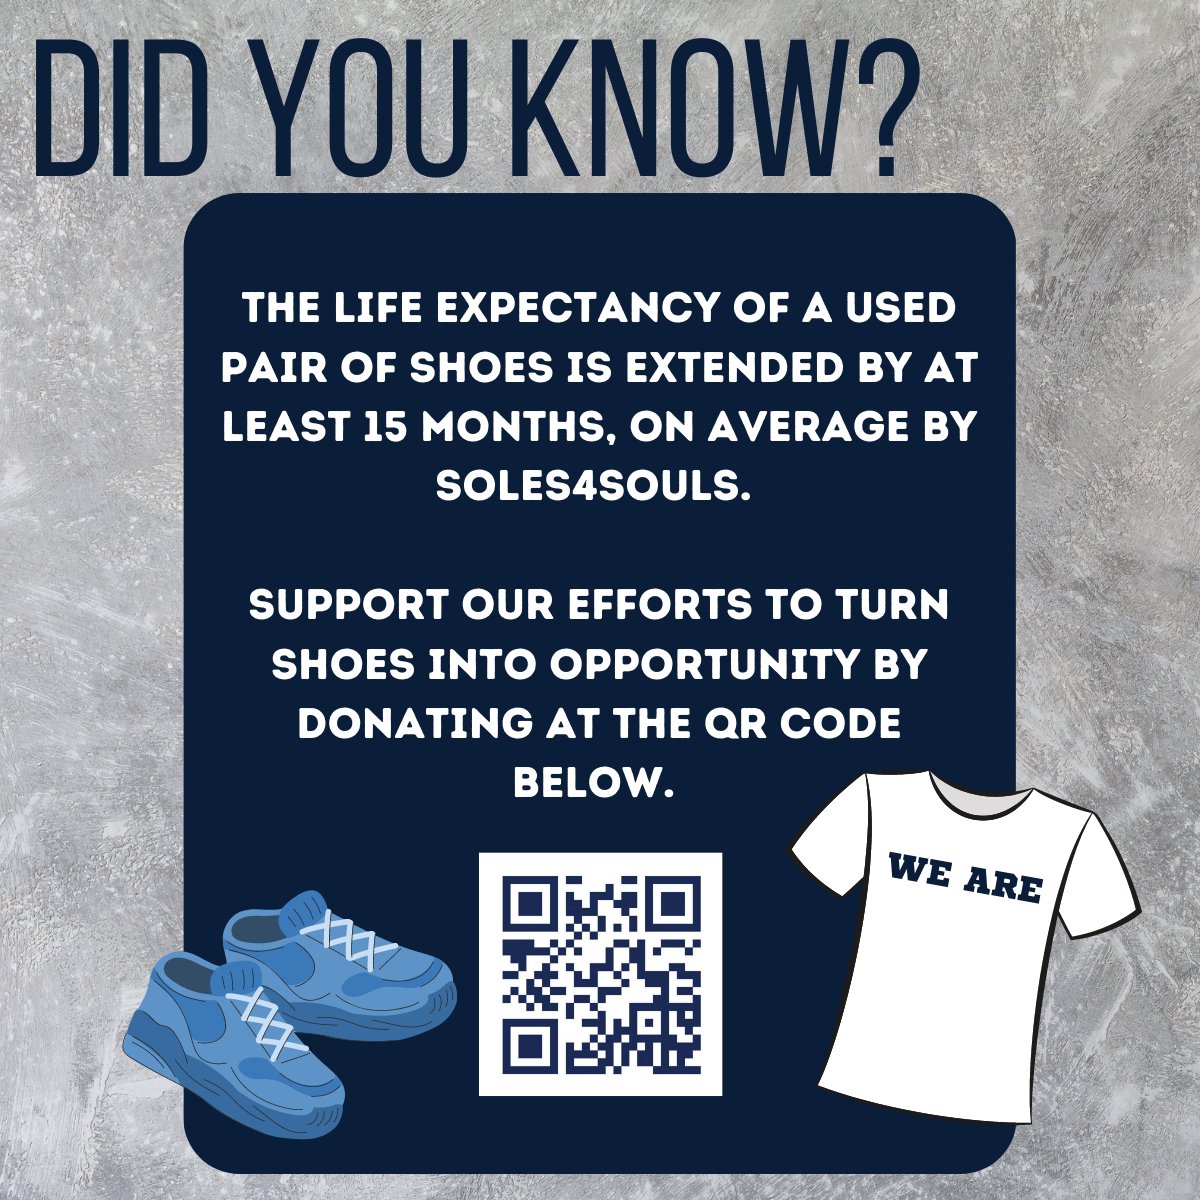 Less than a month away until 12 players travel to Guatemala to distribute shoes to those in need. Scan the QR code below to support them!